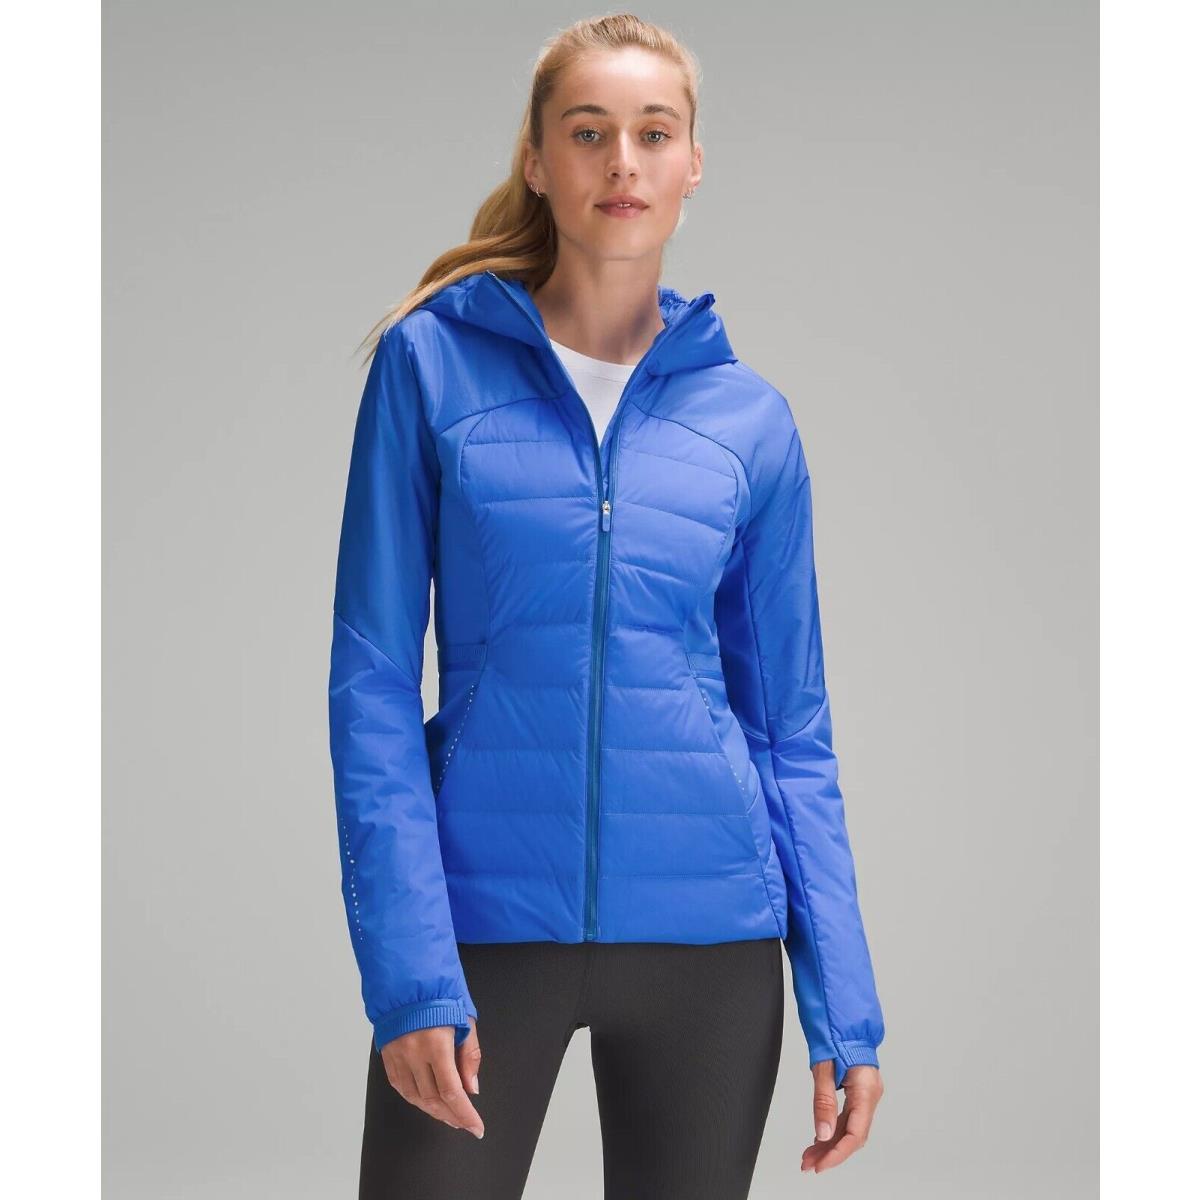 Lululemon Womens Blue Down For It All Jacket Running 700 Fill Size 12